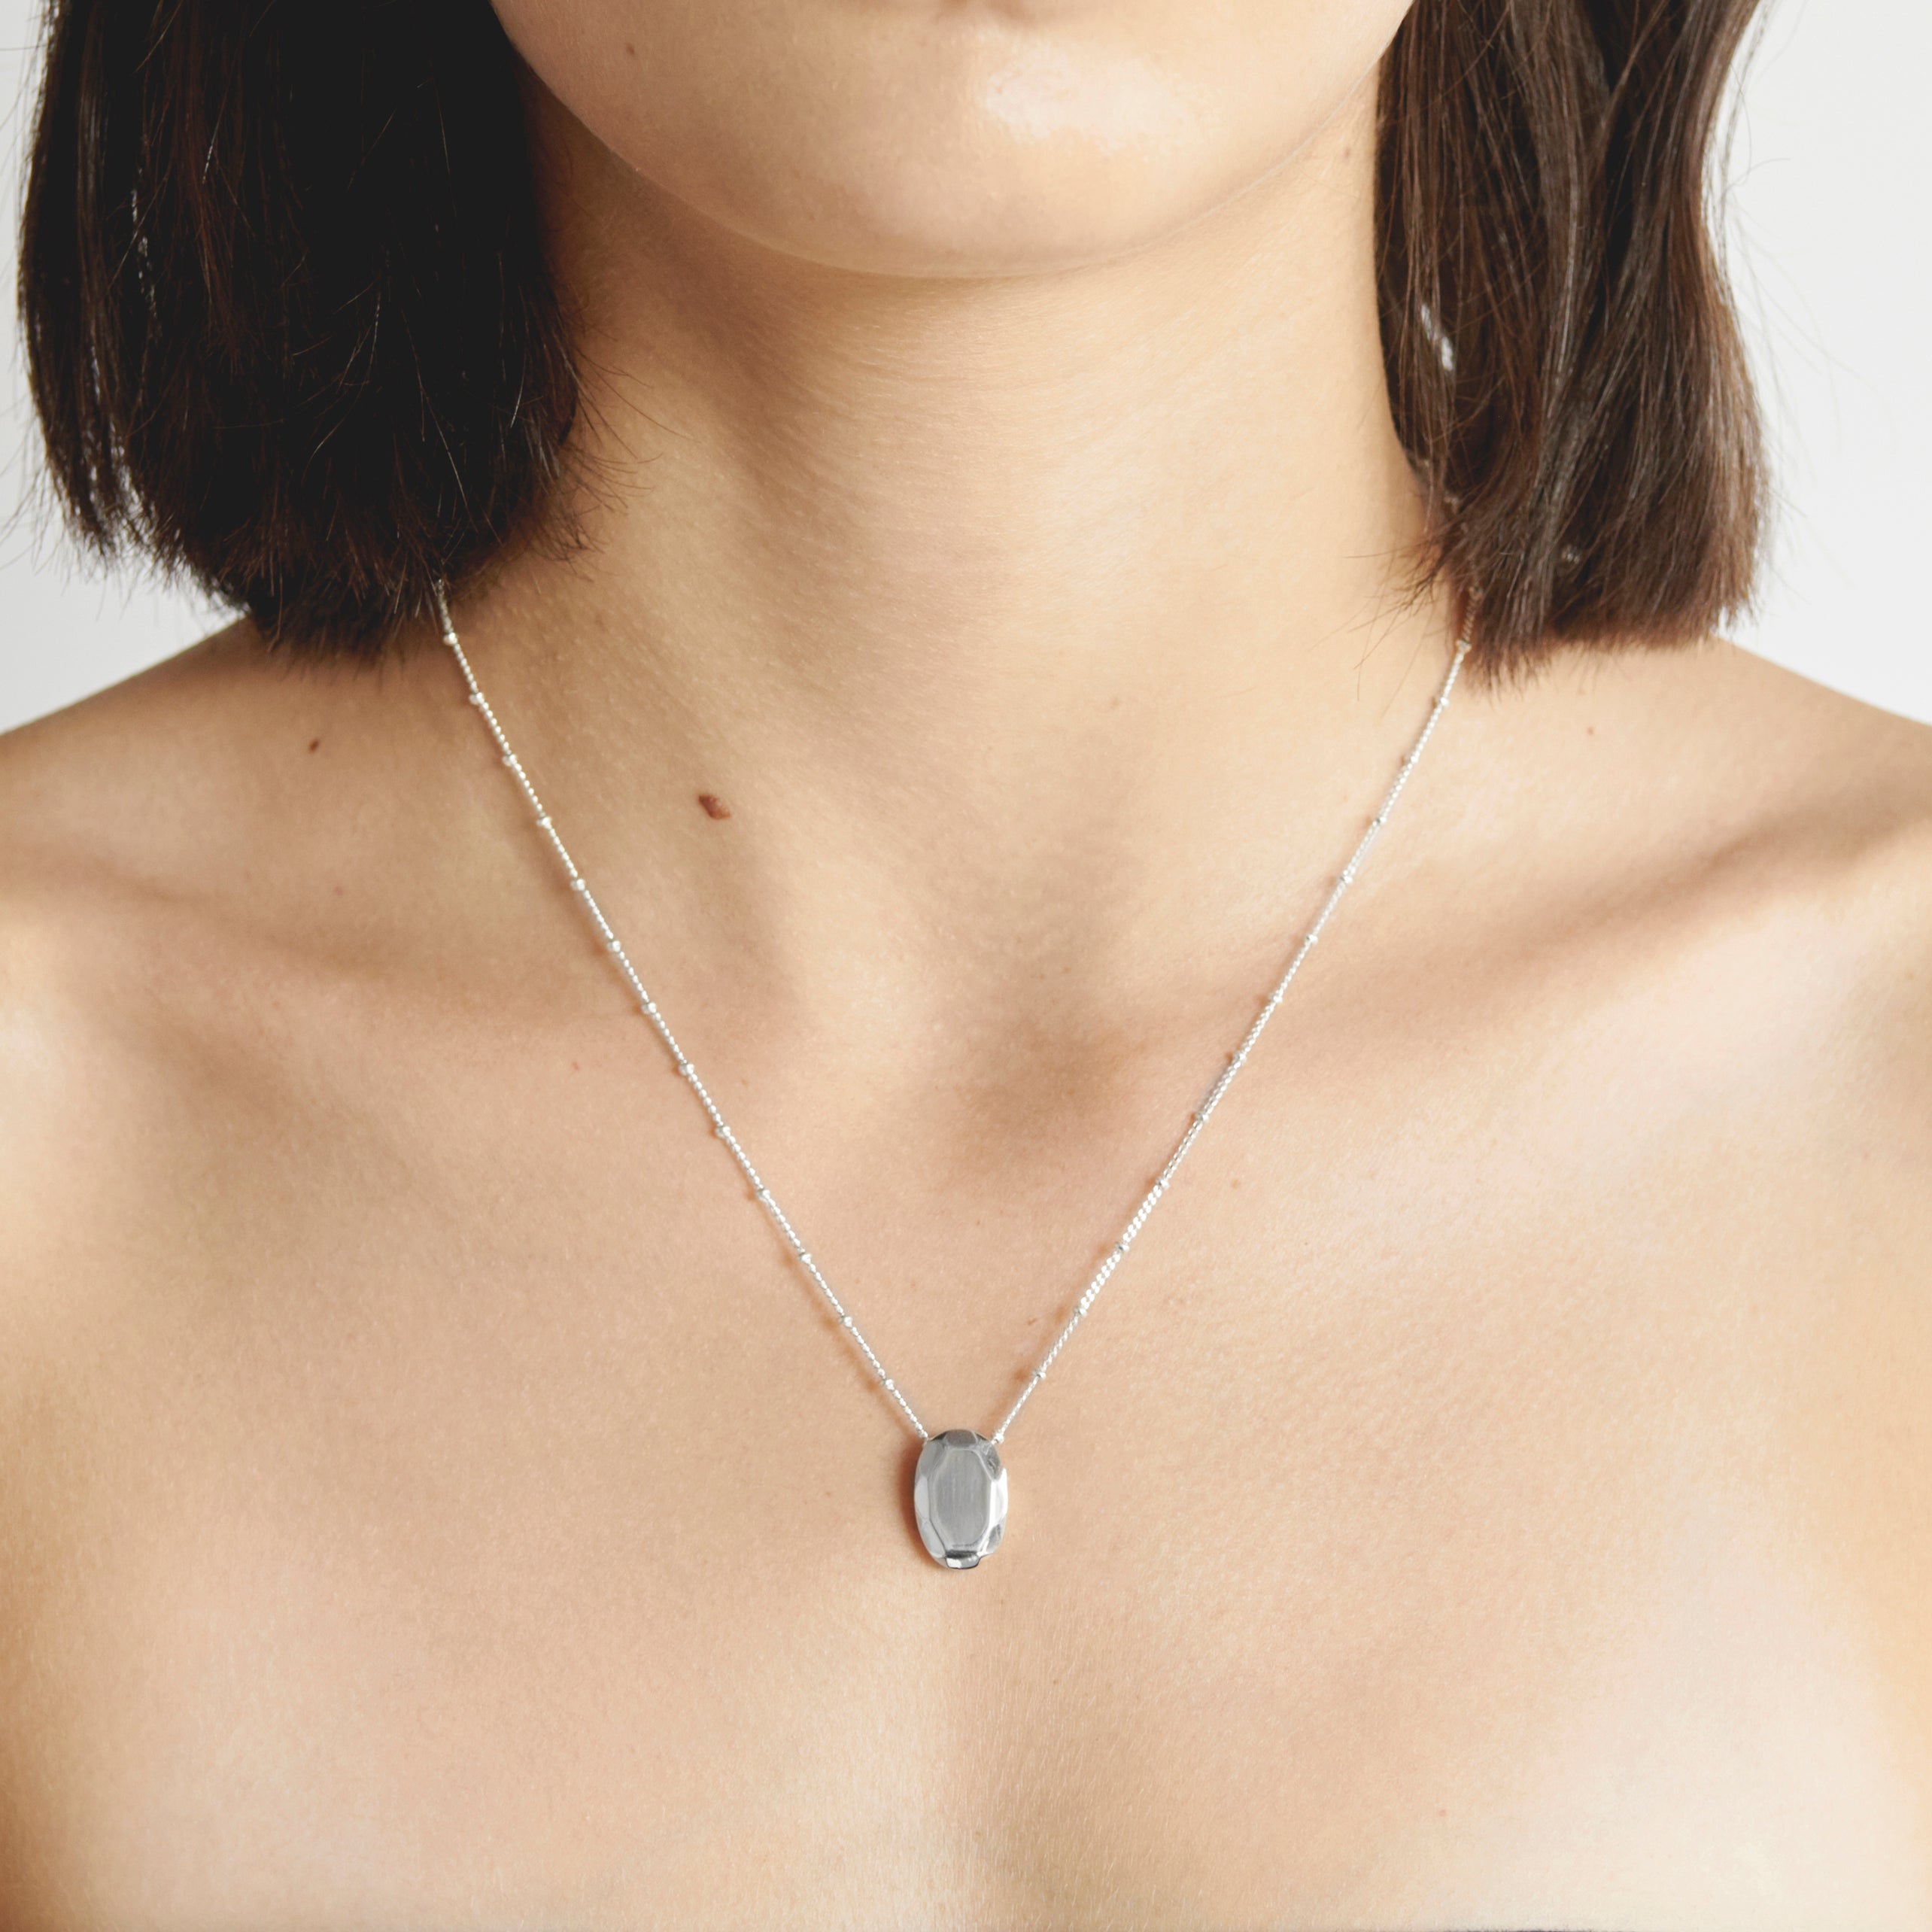 The Oval Pendant